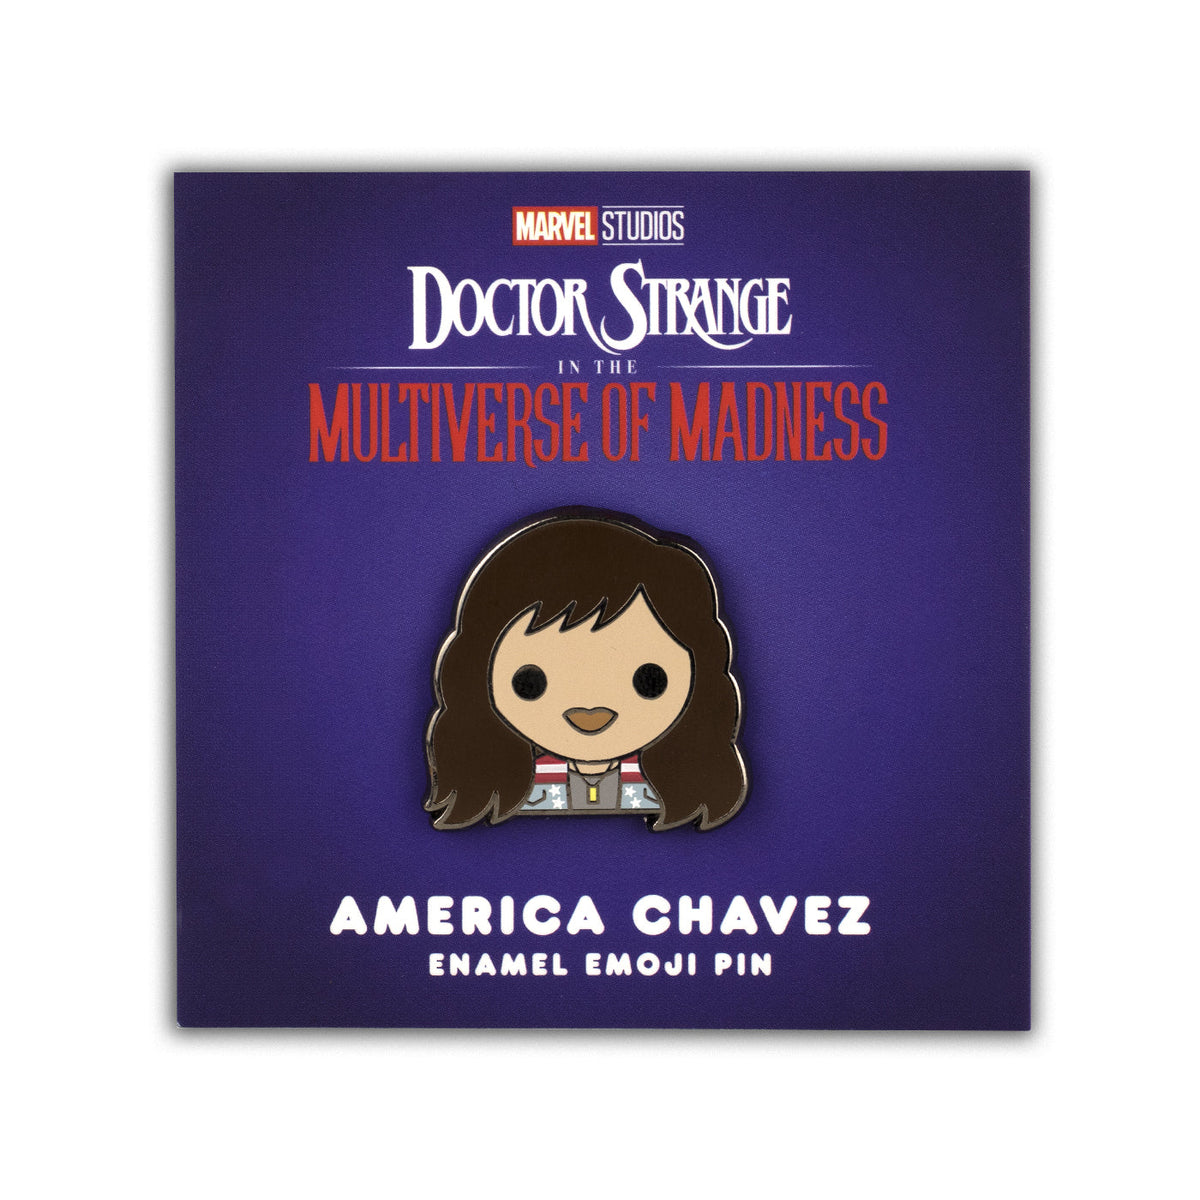  Marvel Studios America Chavez enamel emoji pin pictures with card backing